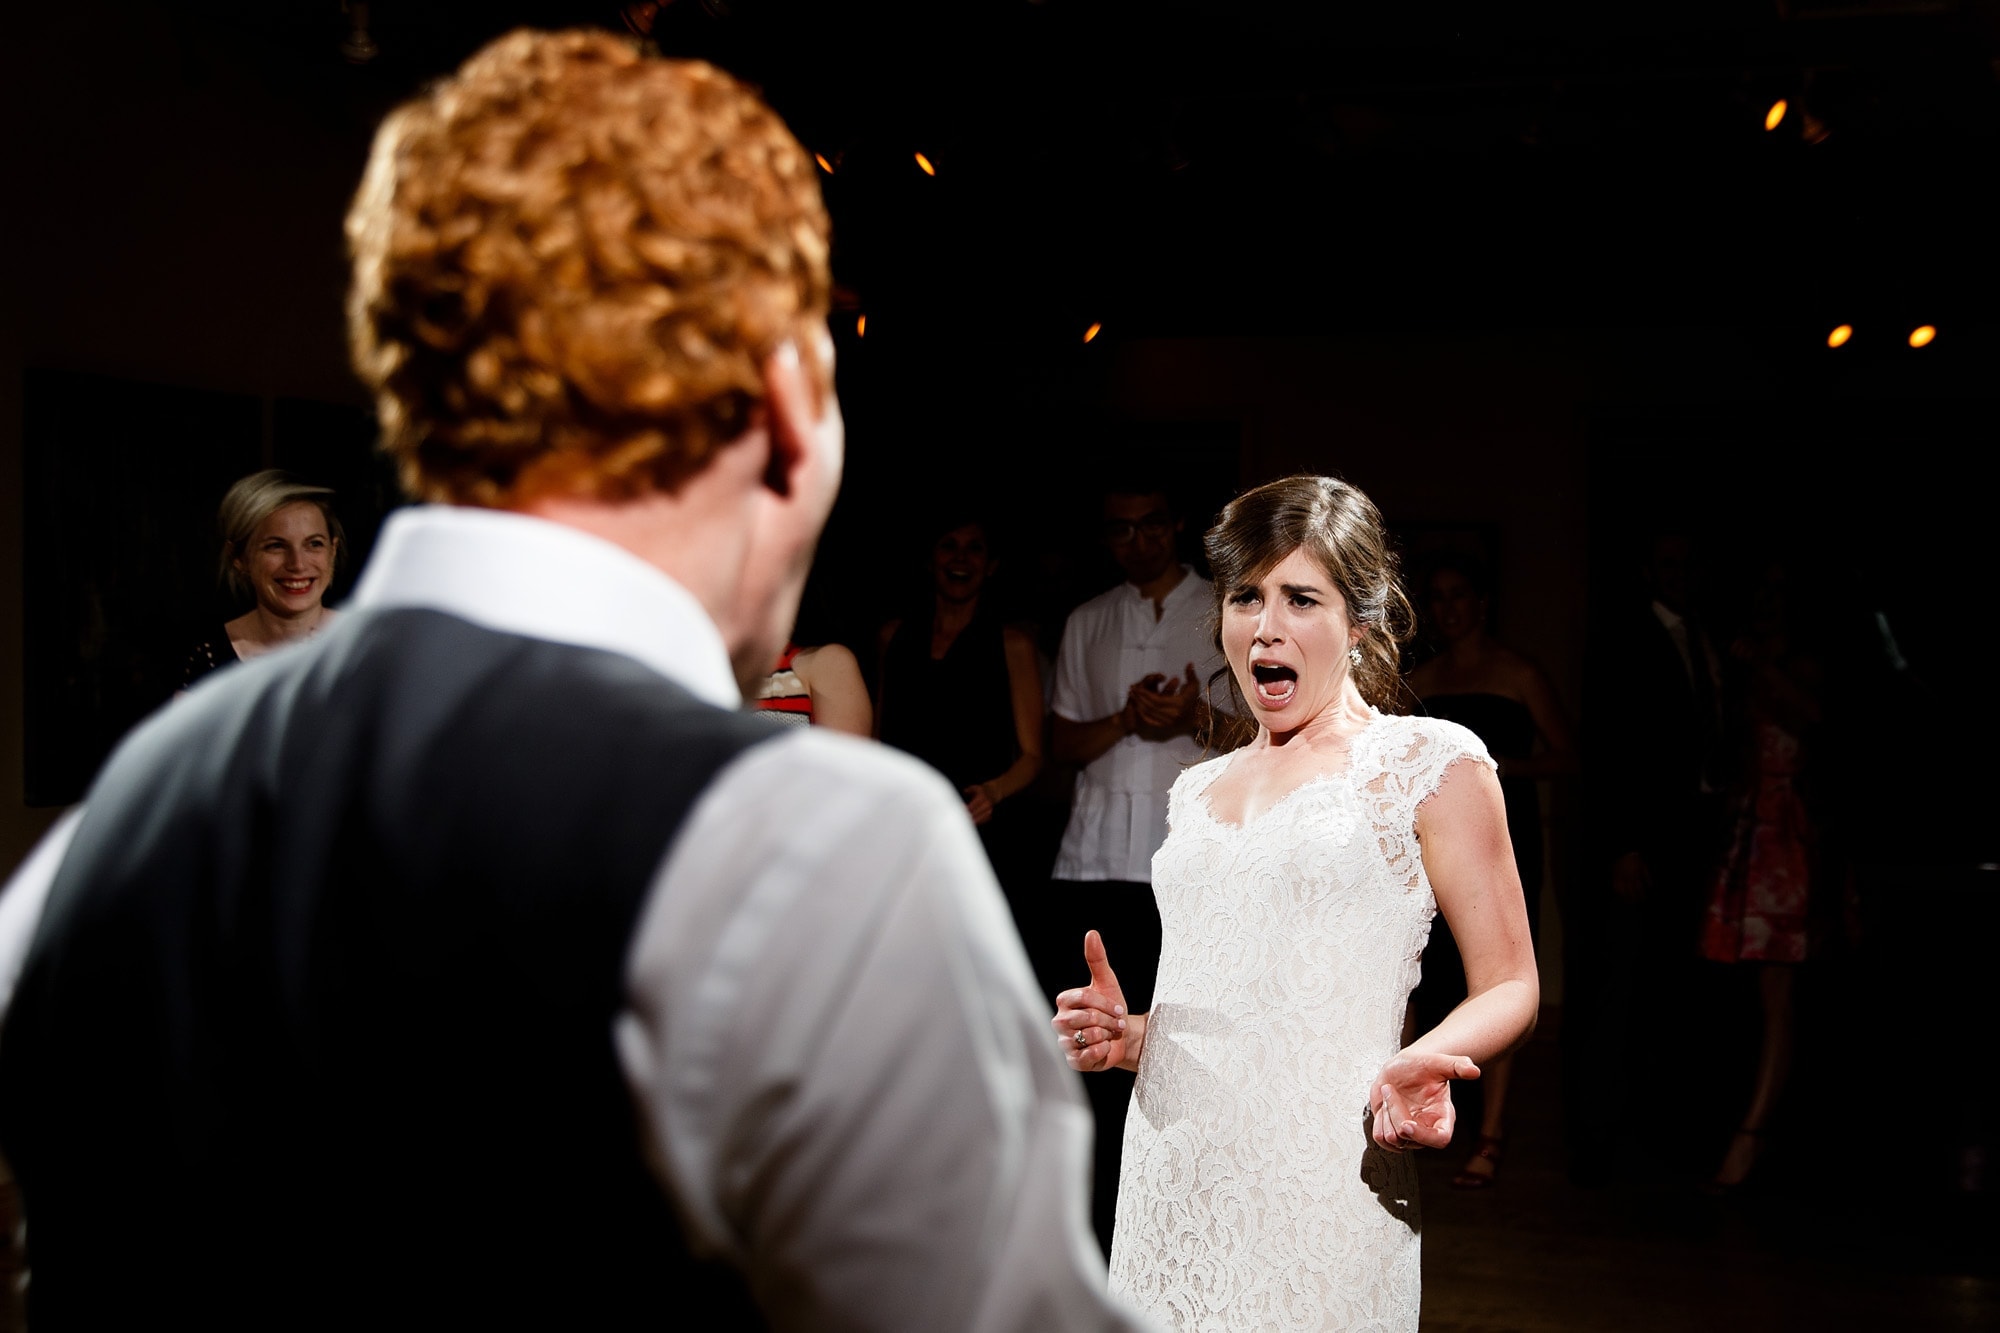 The bride dances with the groom at Rembrandt yard during their reception in Boulder